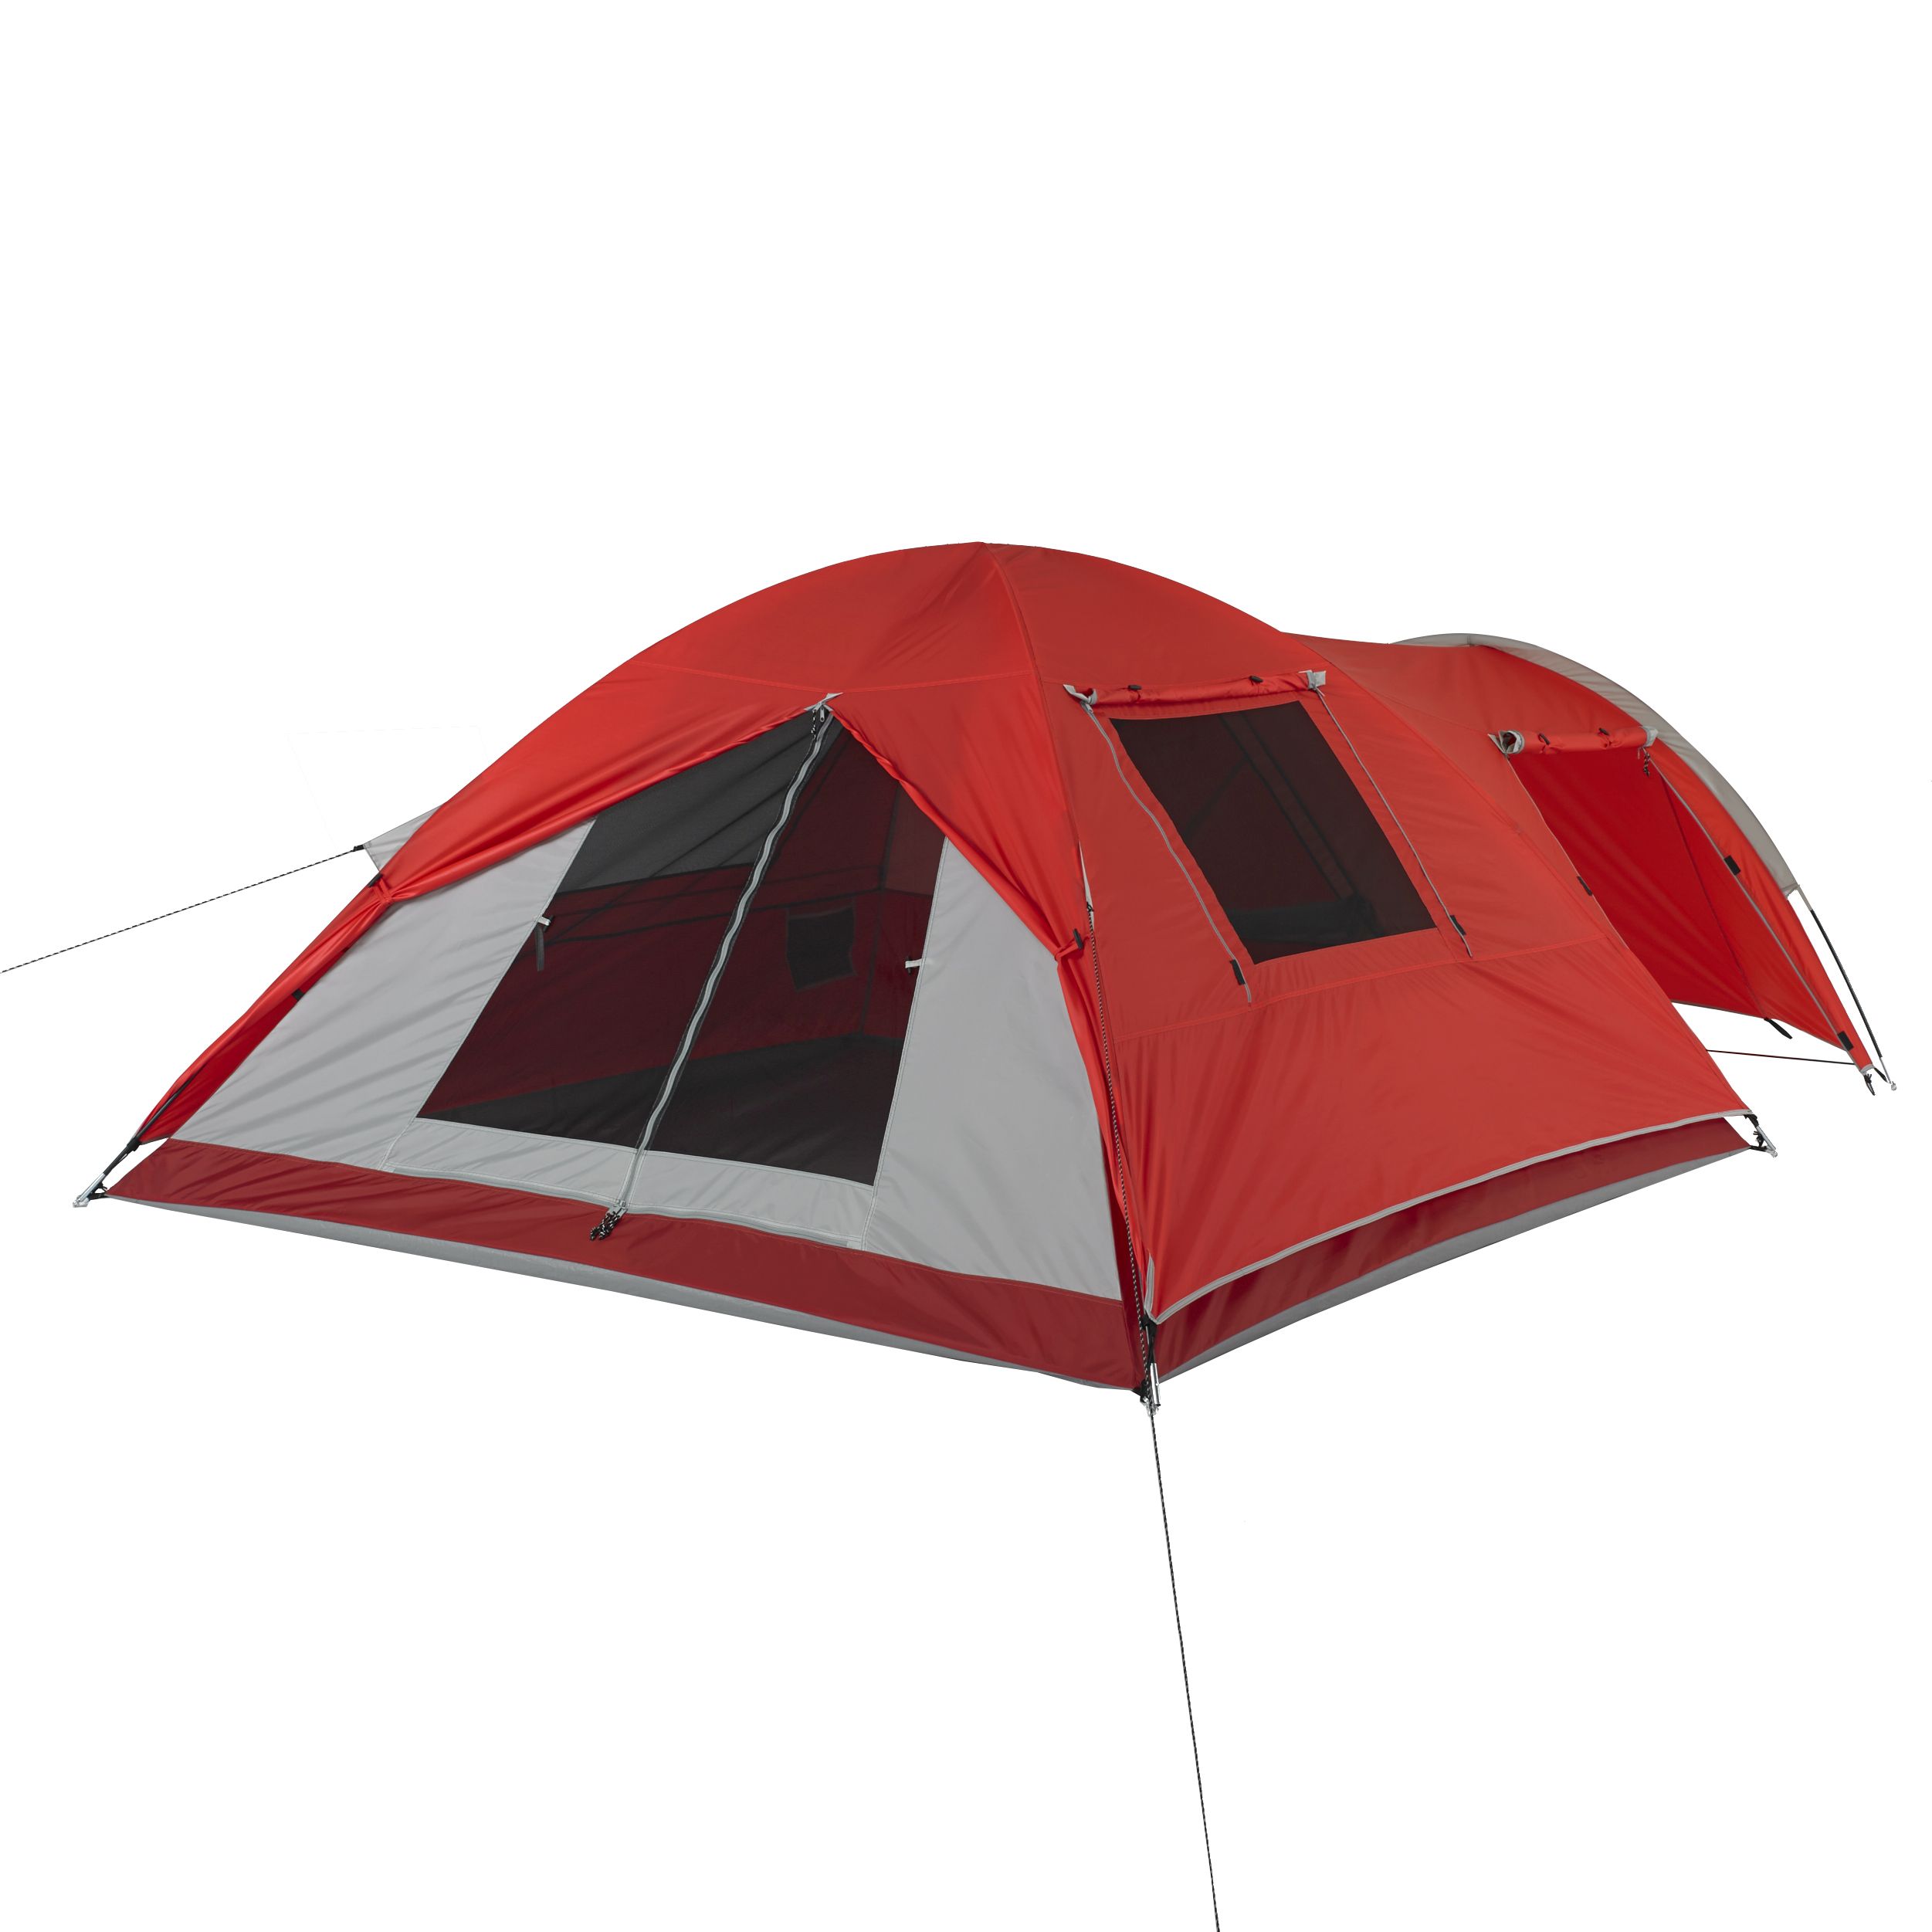 Ozark Trail 4-Person Dome Tent, with Vestibule and Full Coverage Fly - image 3 of 6